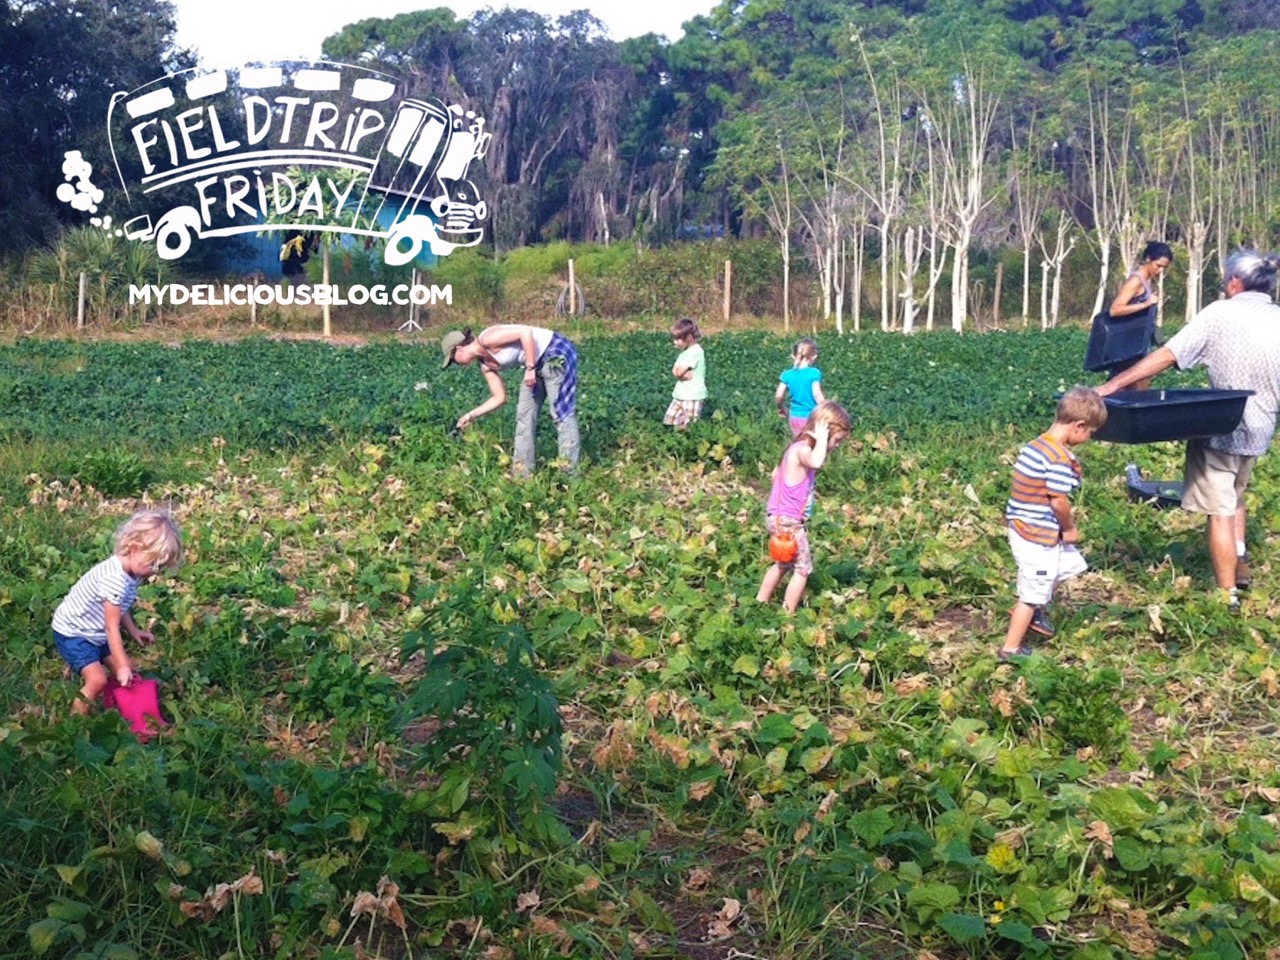 Gleaning at Jessica's Farm